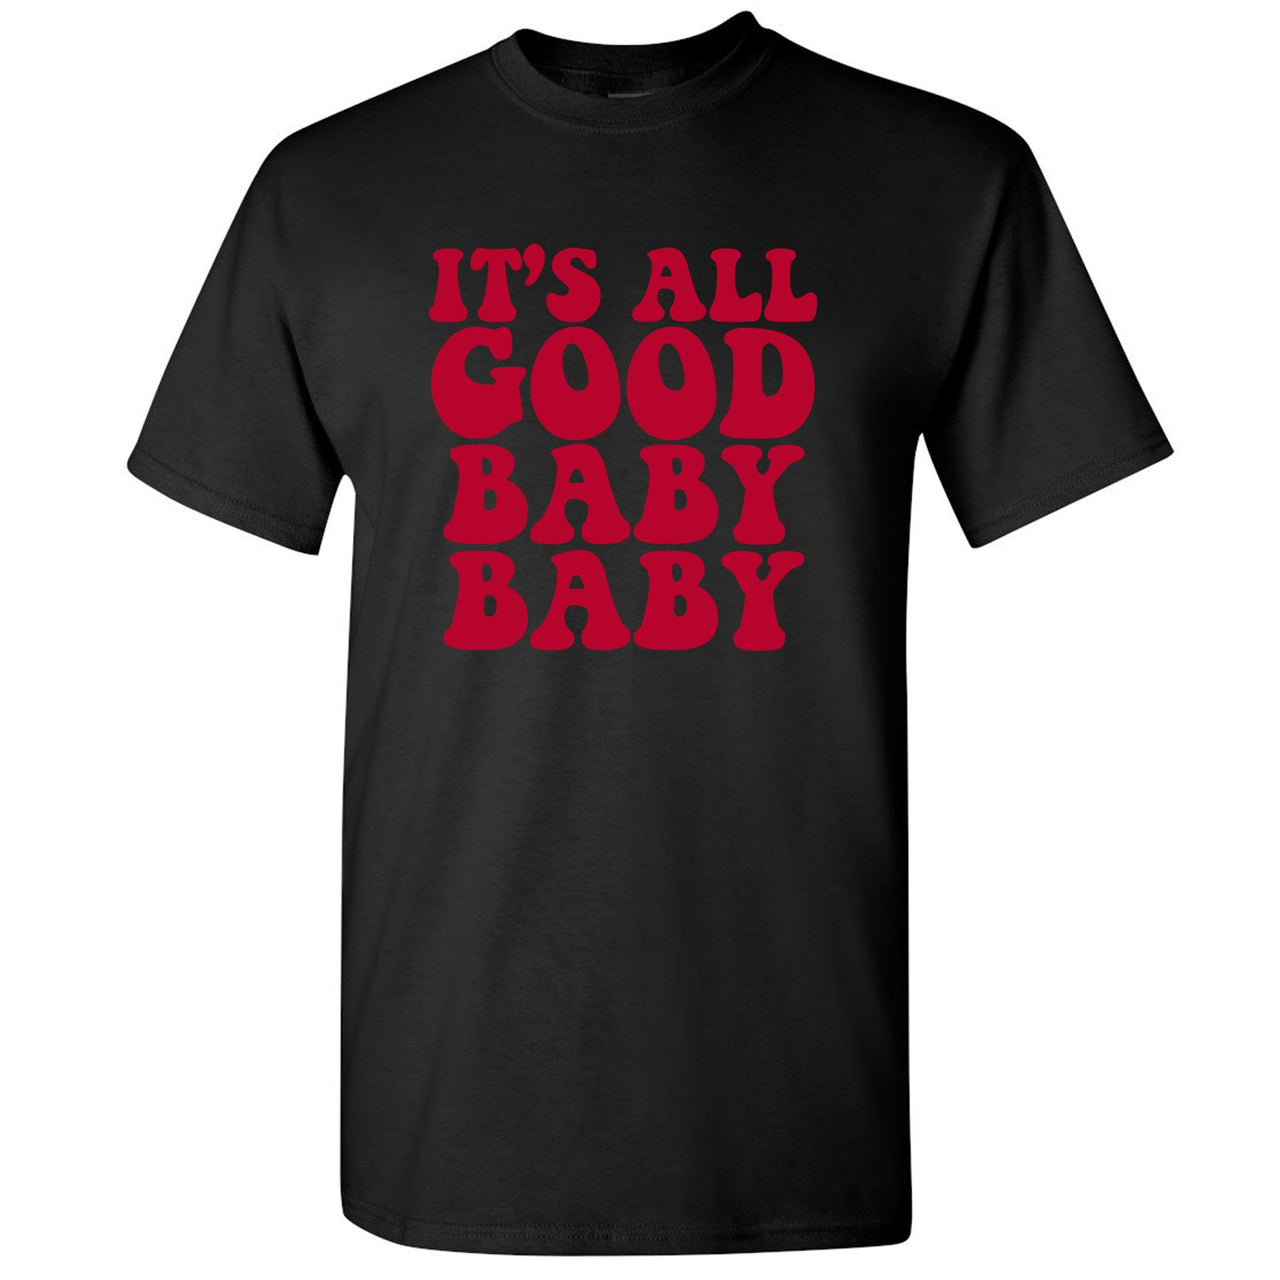 Bred 2019 4s T Shirt | It's All Good Baby Baby, Black